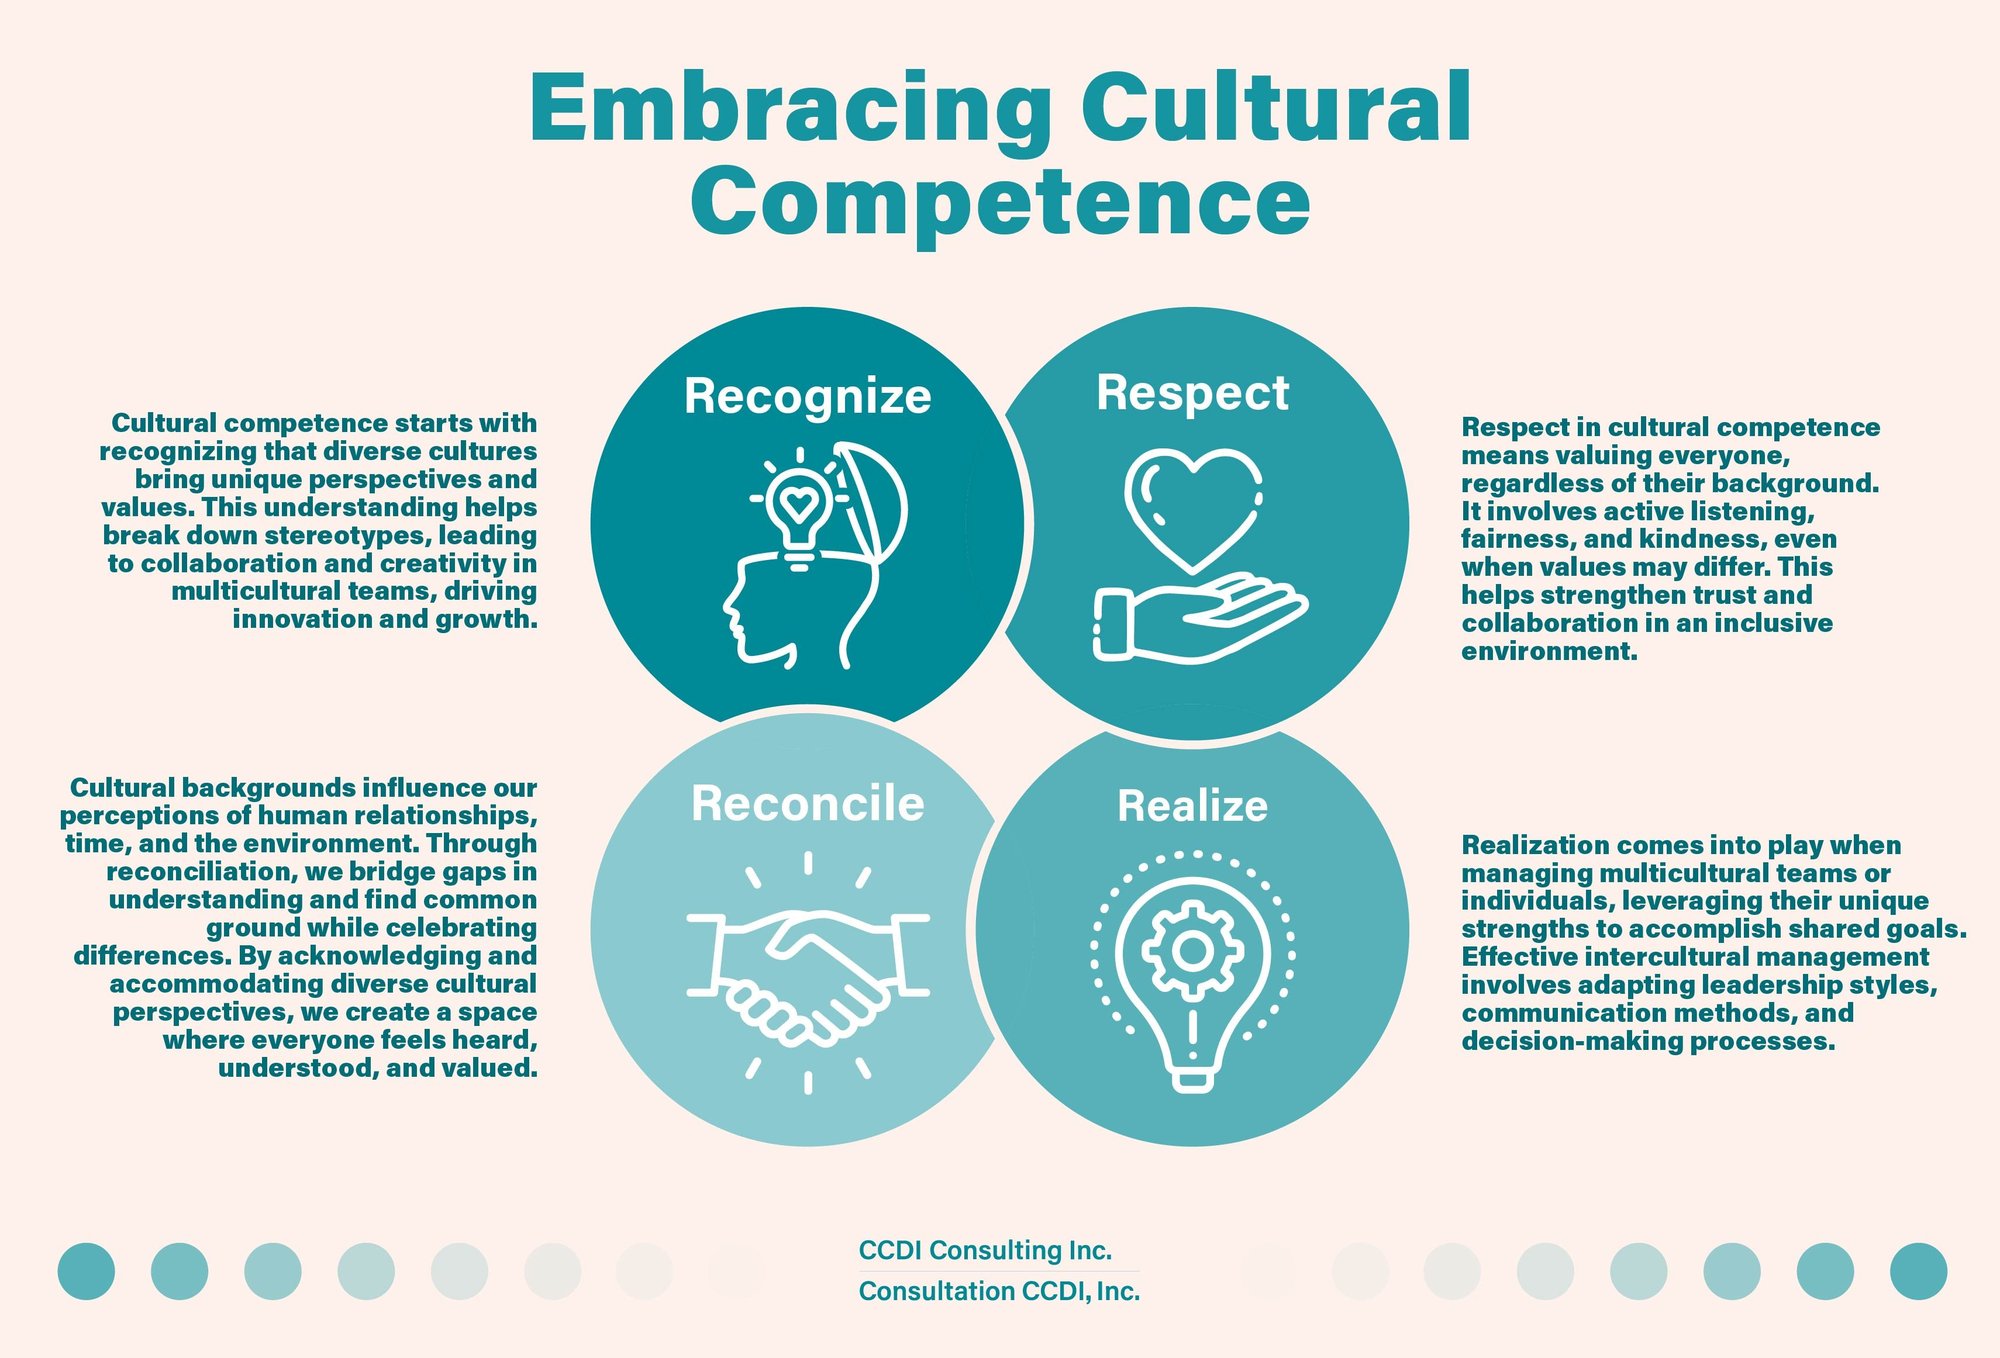 Embracing Cultural Competence - Recognize, Respect, Reconcile, Realize